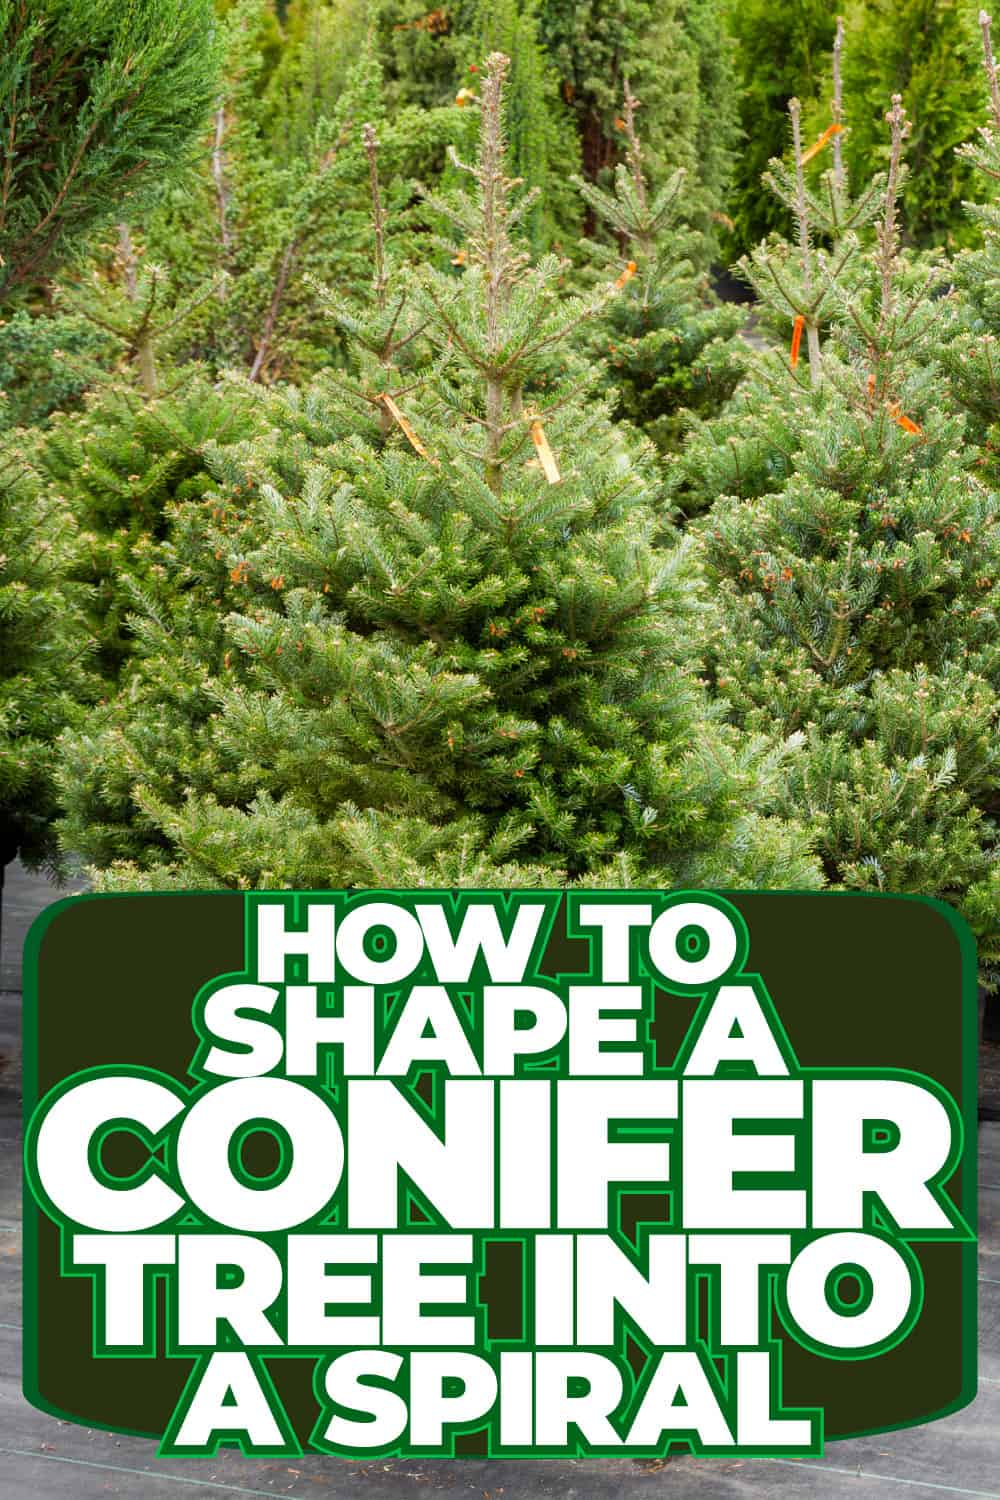 How To Shape A Conifer Tree Into A Spiral [Step-By-Step Guide]
